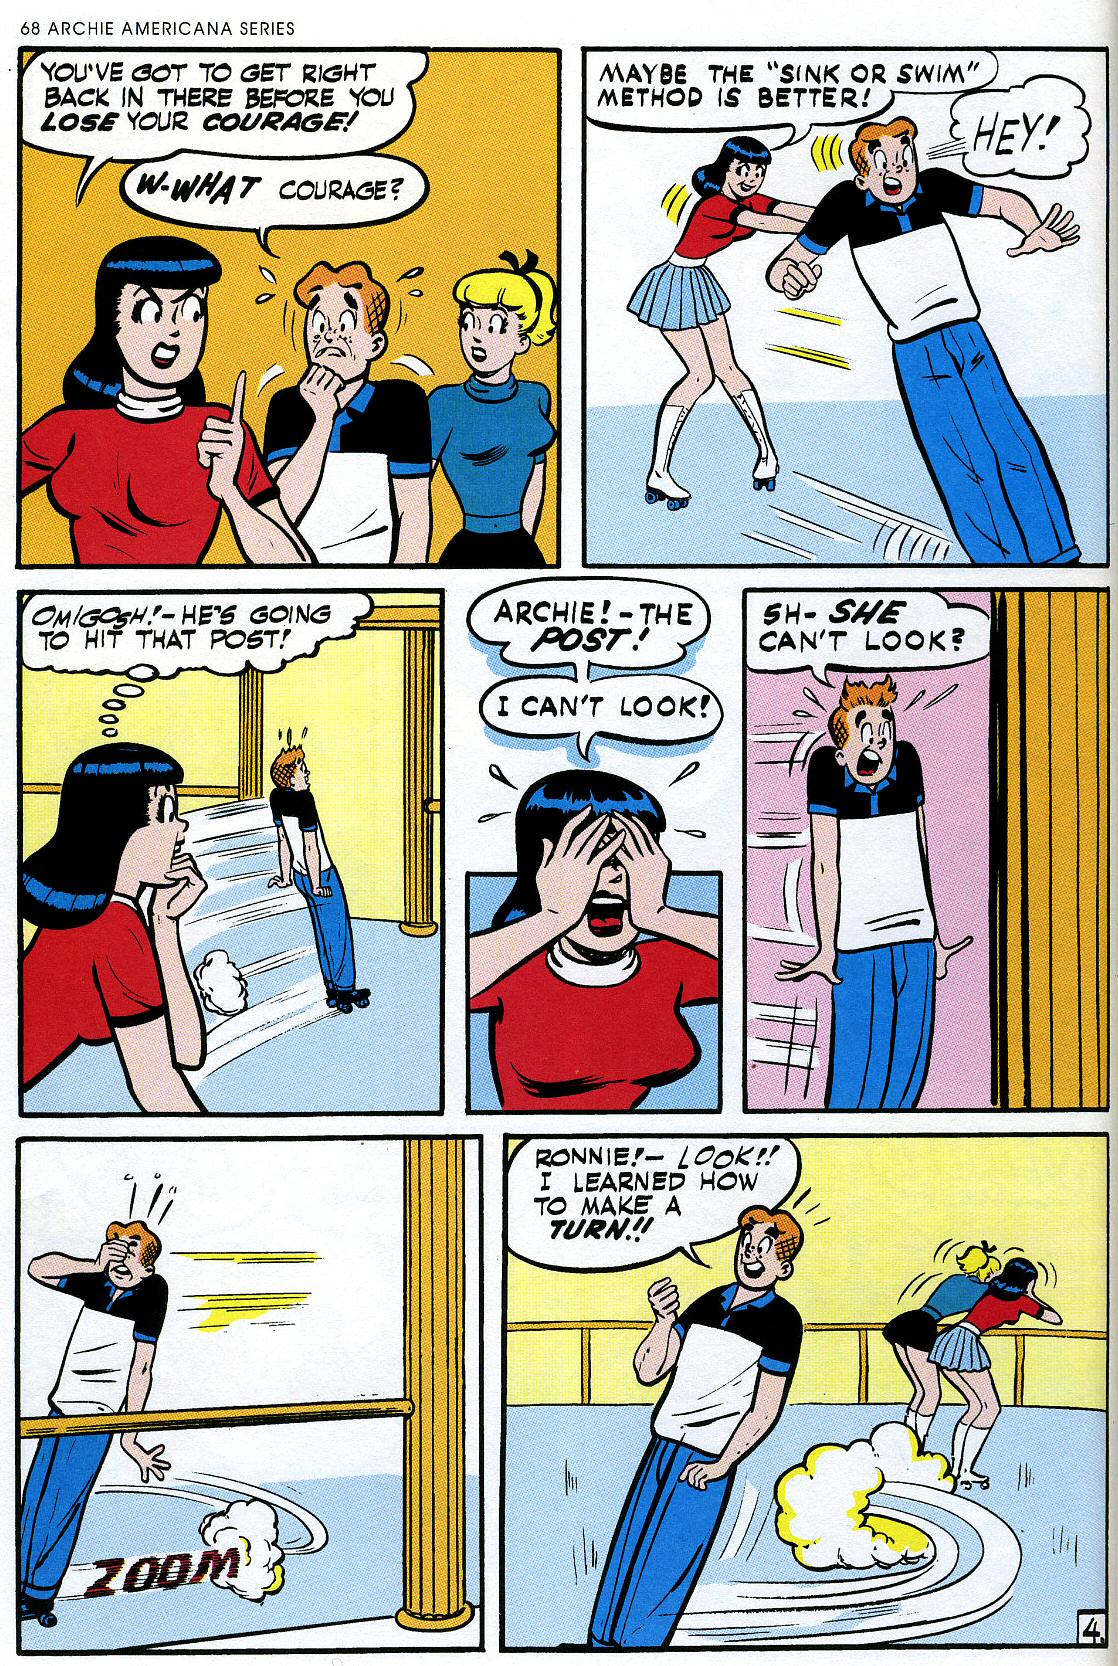 Read online Archie Americana Series comic -  Issue # TPB 2 - 70